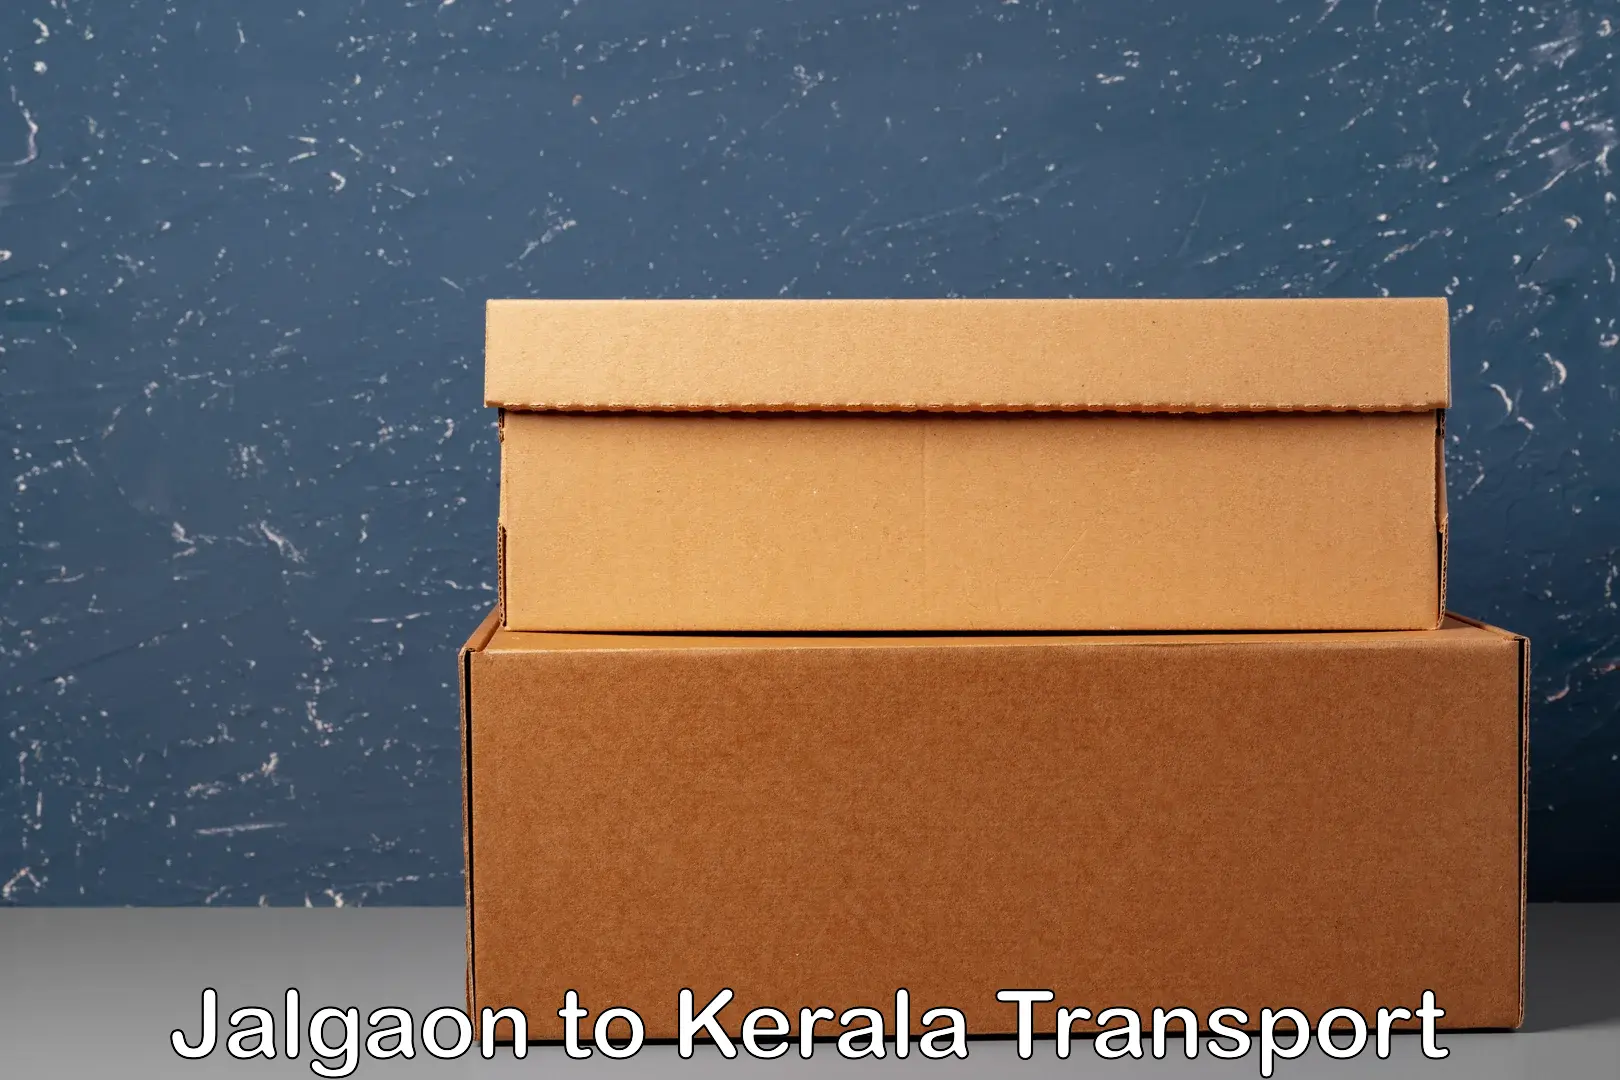 Parcel transport services in Jalgaon to Kerala